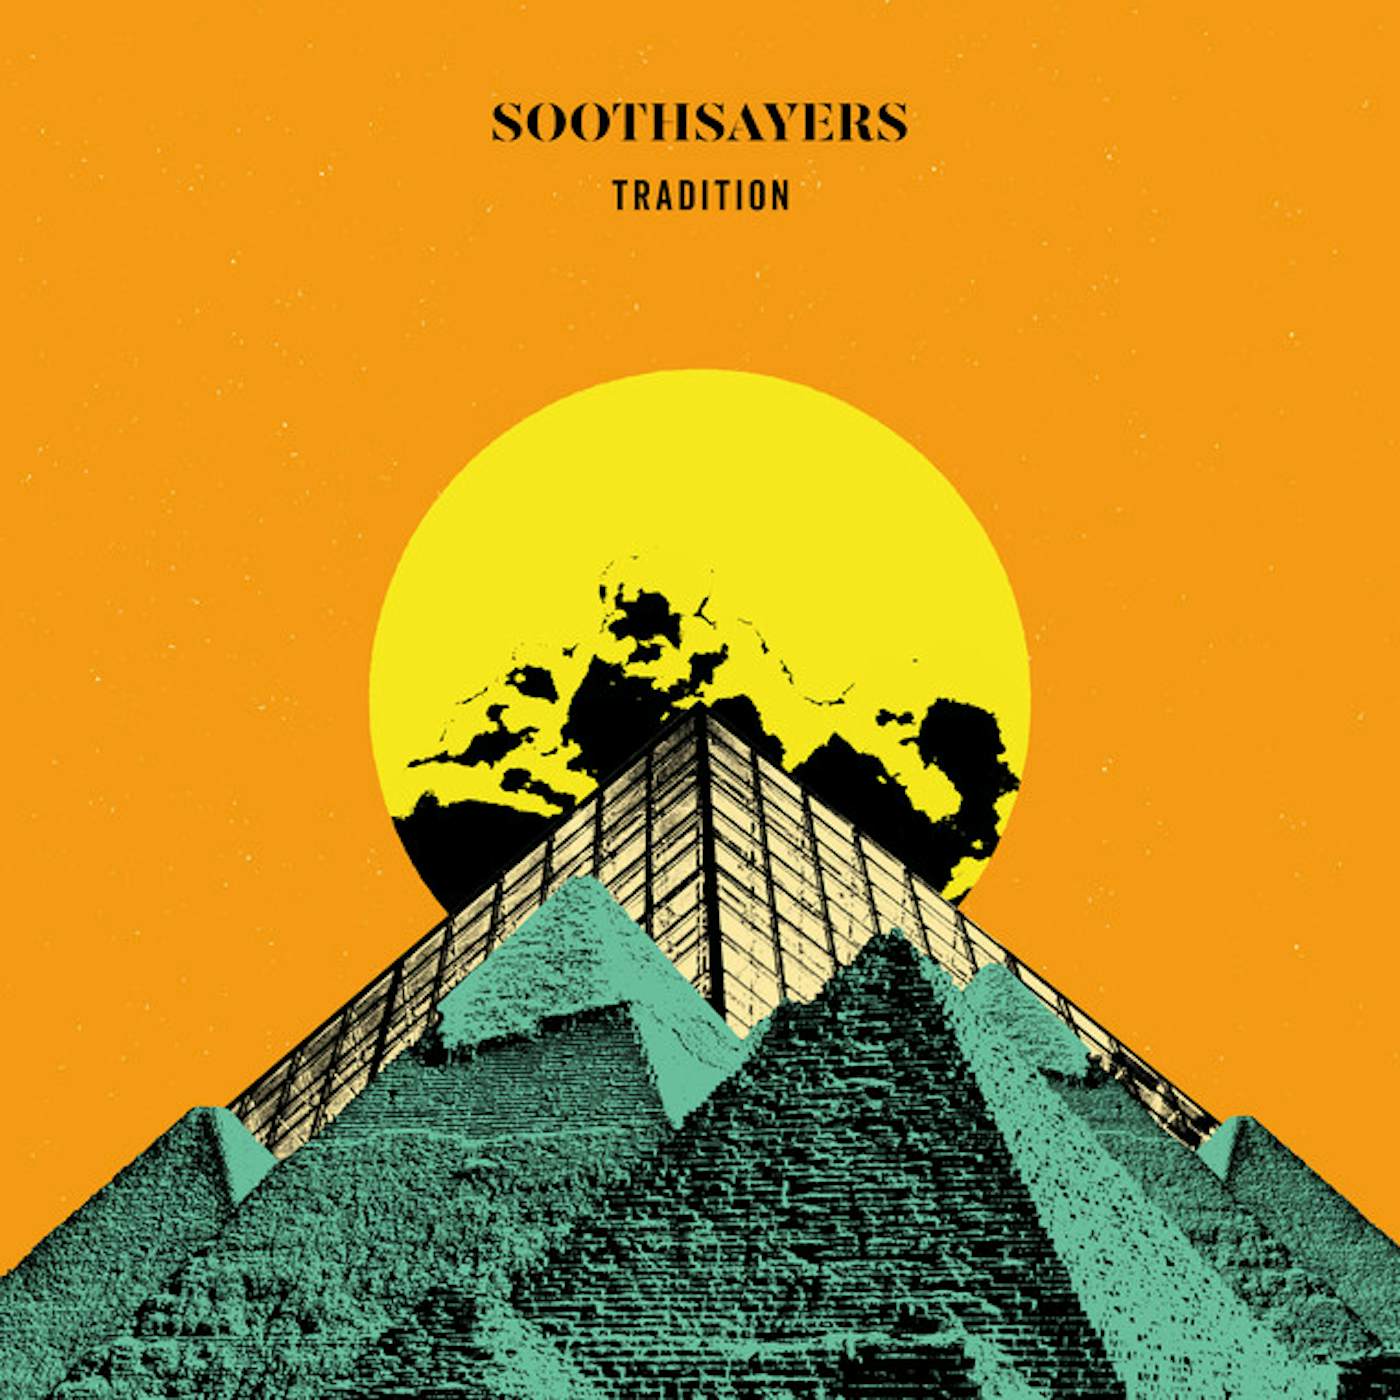 Soothsayers Tradition Vinyl Record